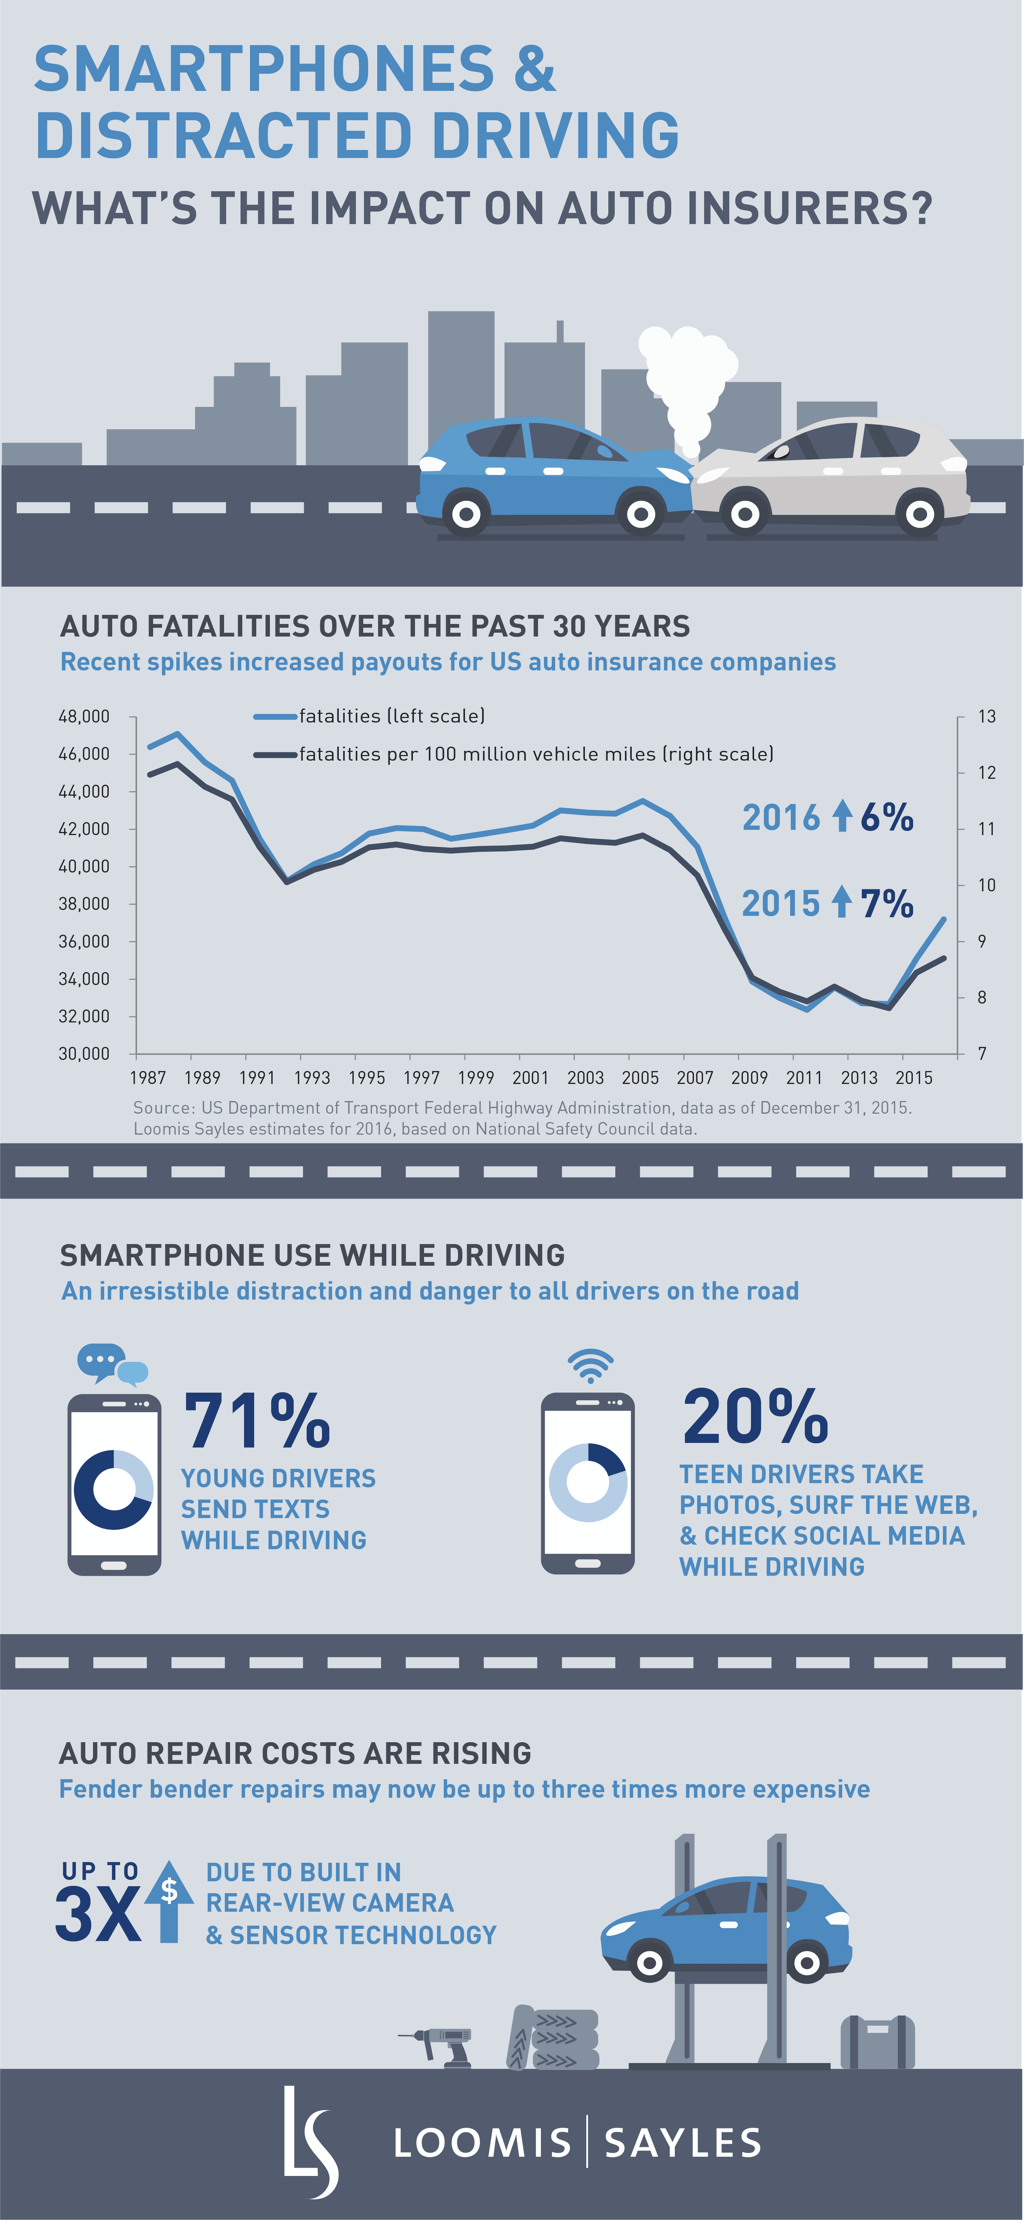 Smartphones and Auto Insurance_finalV2.png